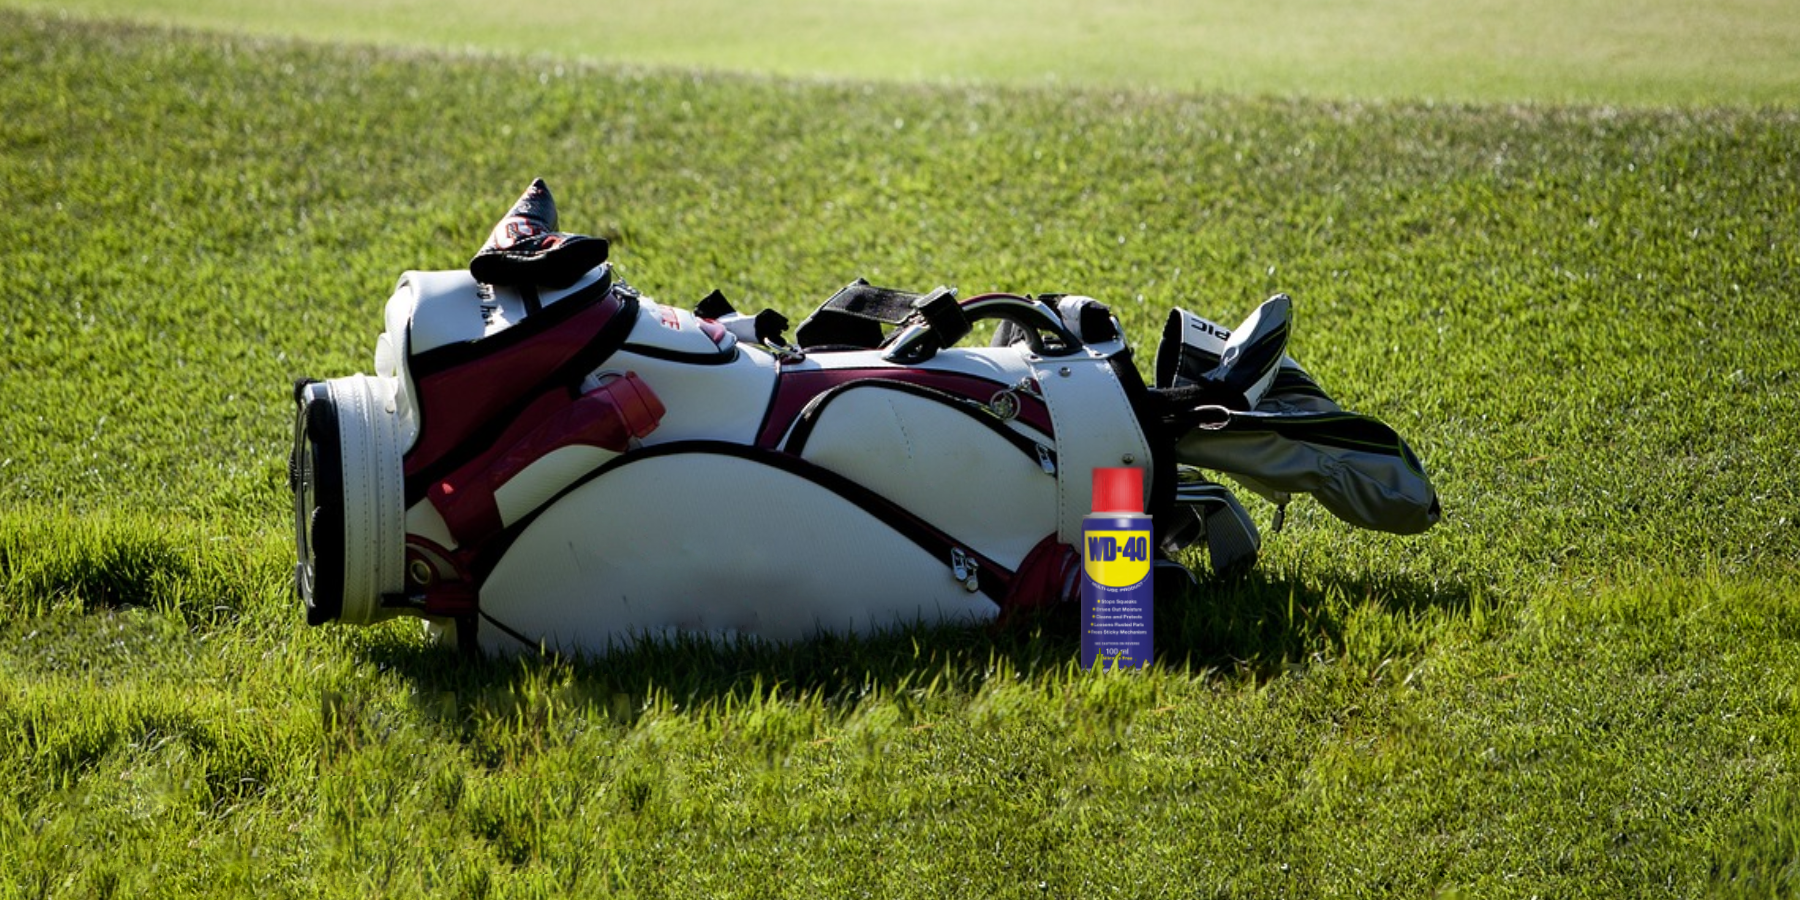 Iron out your game with WD-40